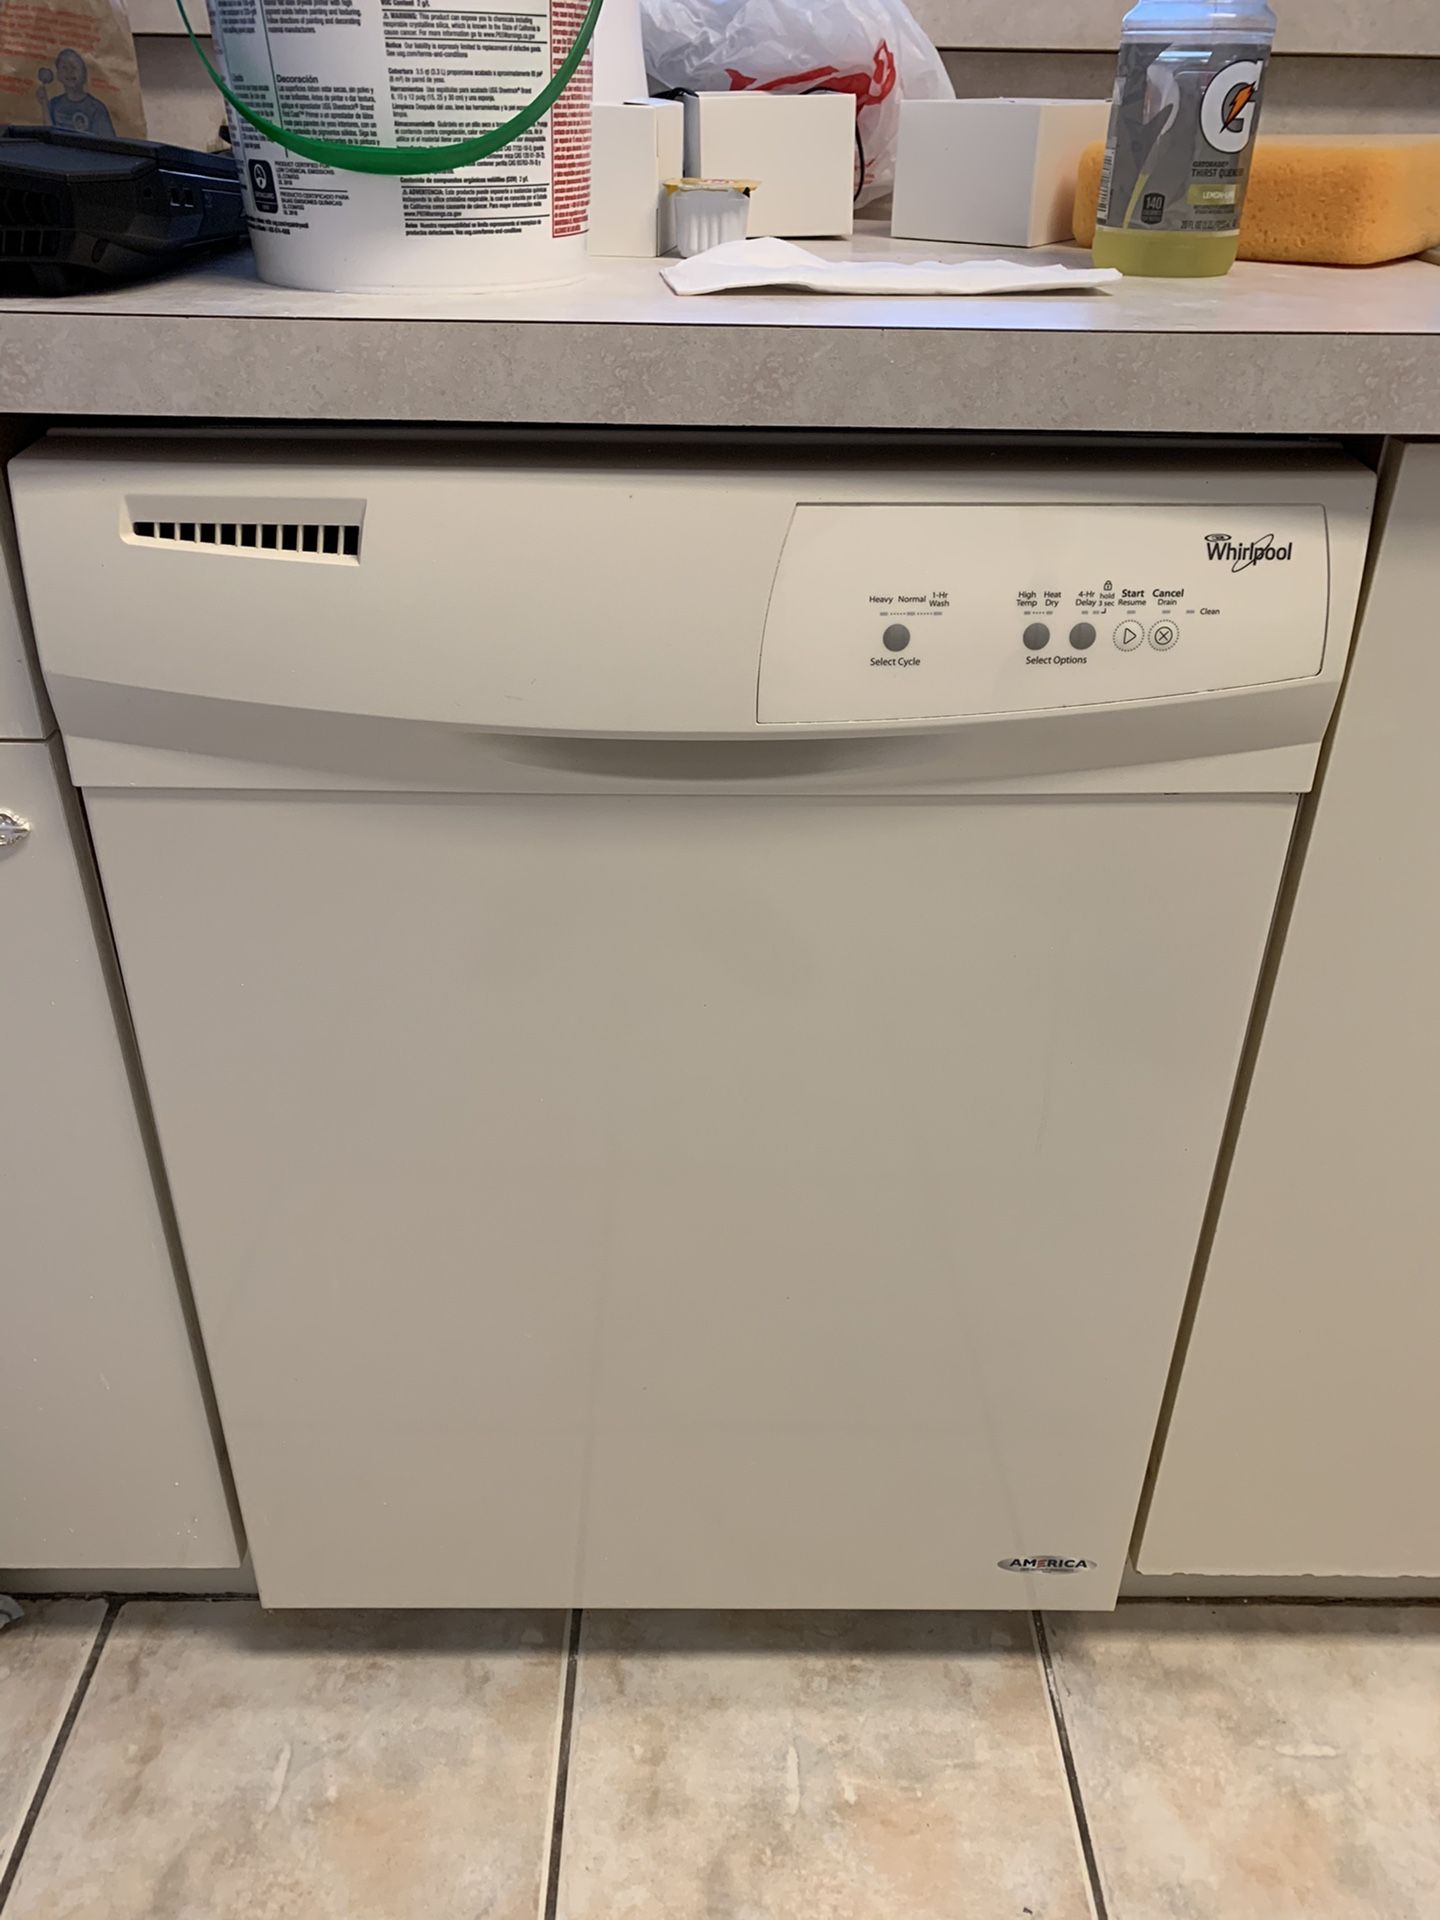 Whirlpool dishwasher in great condition